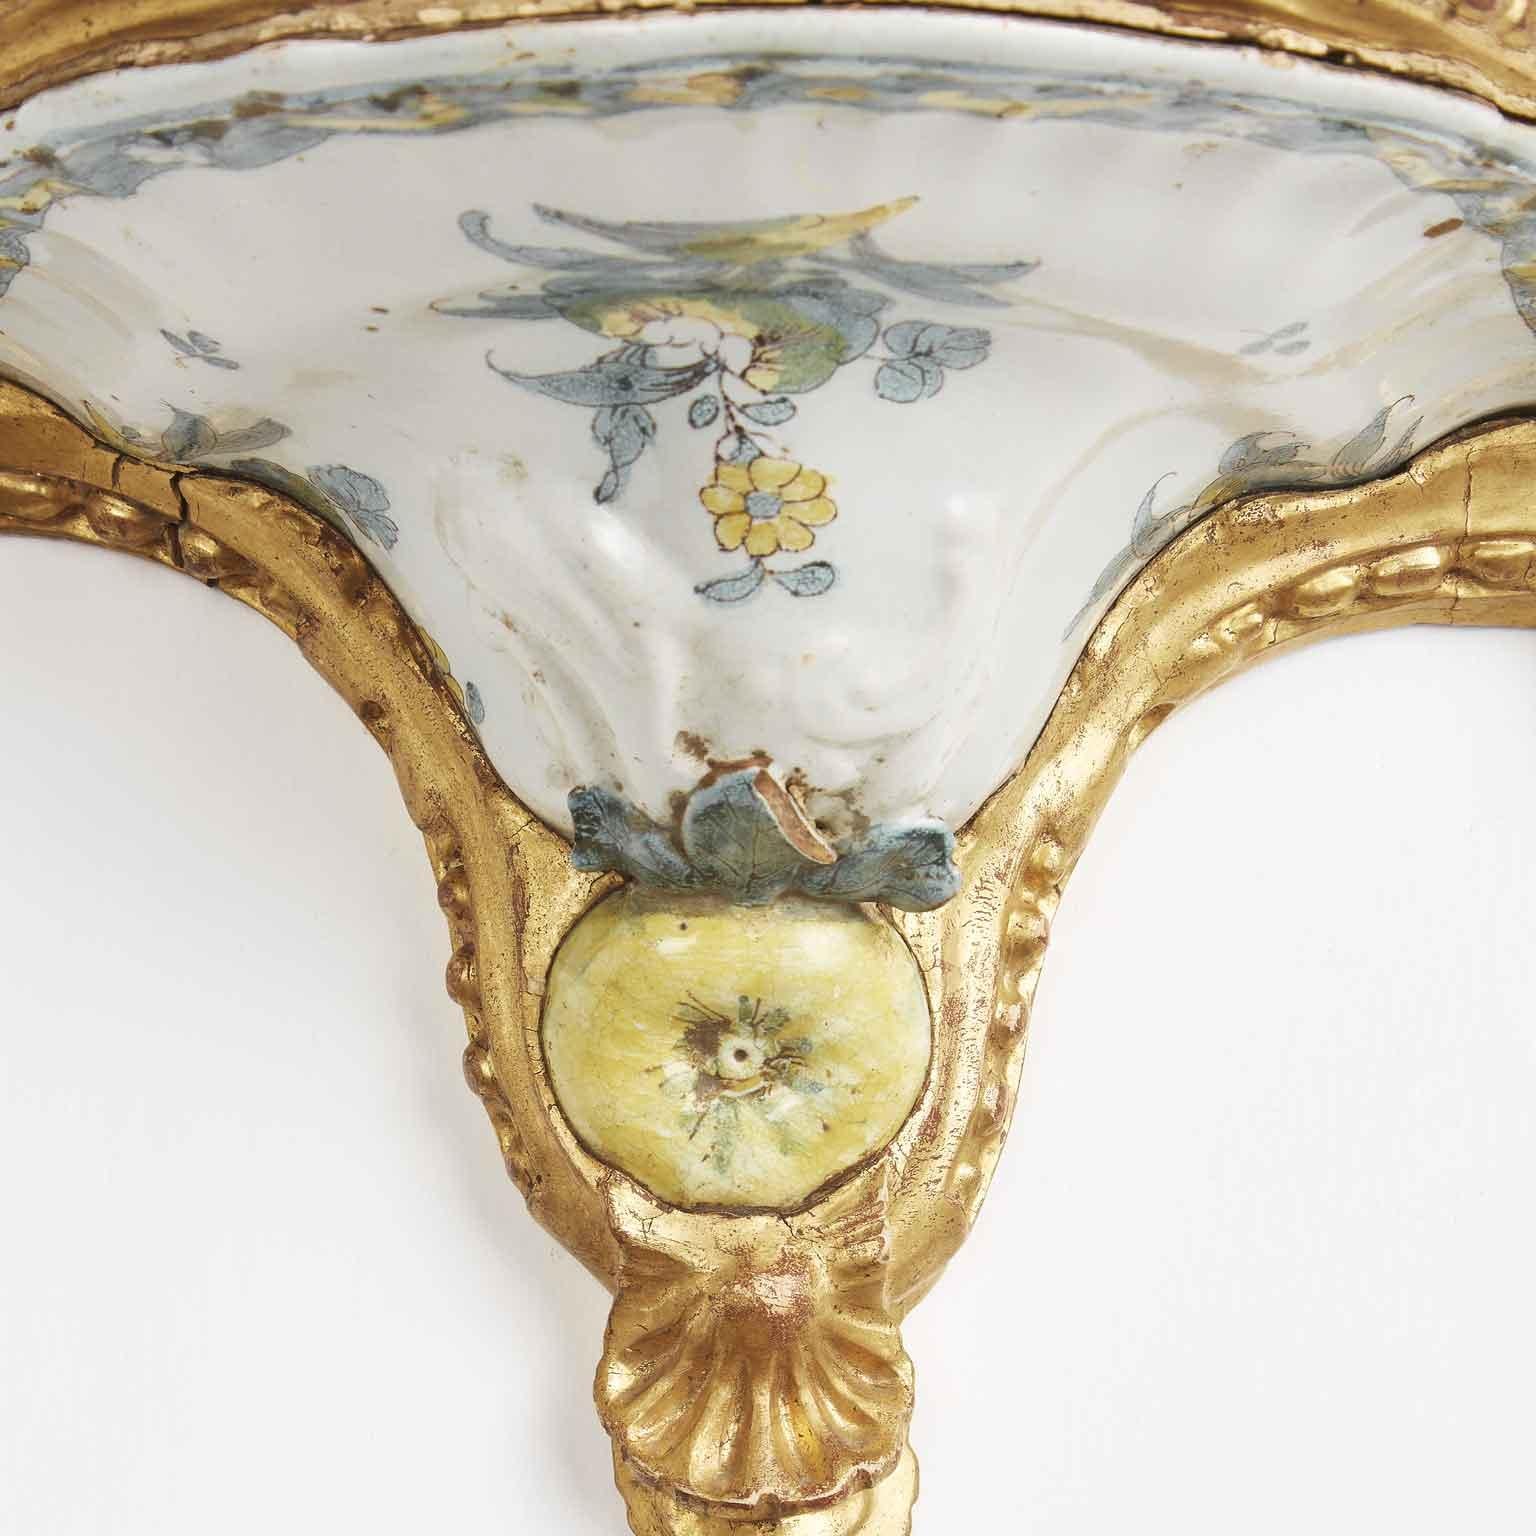 Delightful and unique pair of Baroque carved and gilded wall brackets realized with a white and green hand-painted majolica demi tureen lid of a Southern Italy manufacture Cerreto Sannita of the 18th century.

The ancient maiolica shows a fine